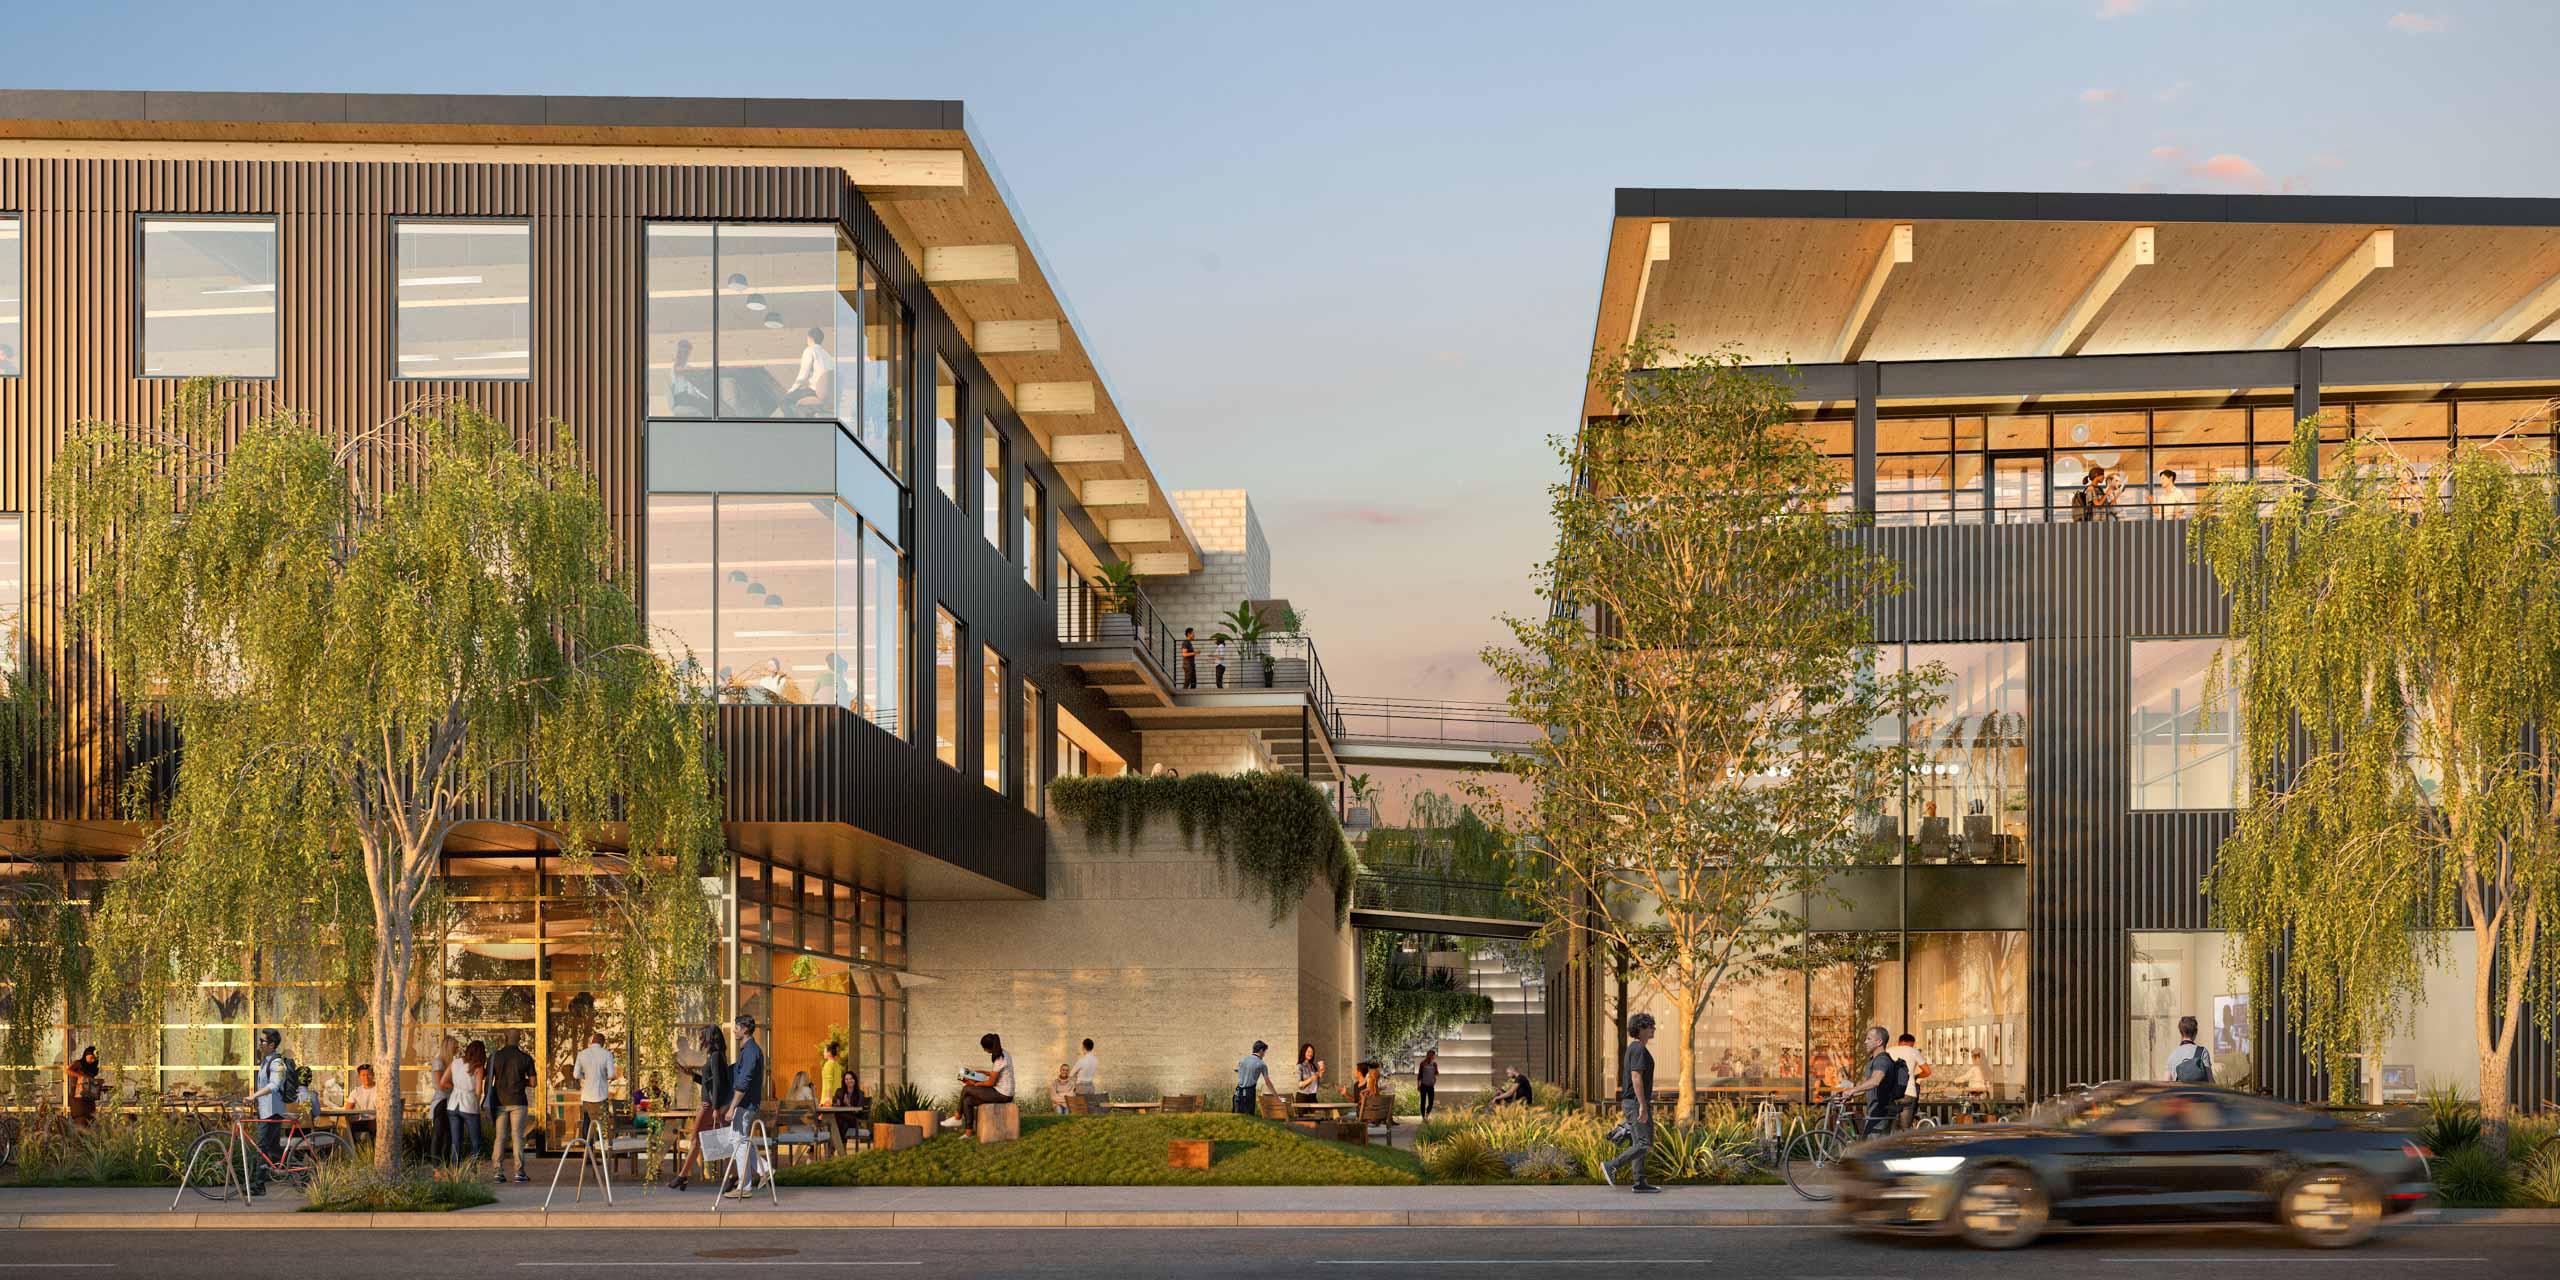 Exterior of 42XX at golden hour, rendering by Kilograph